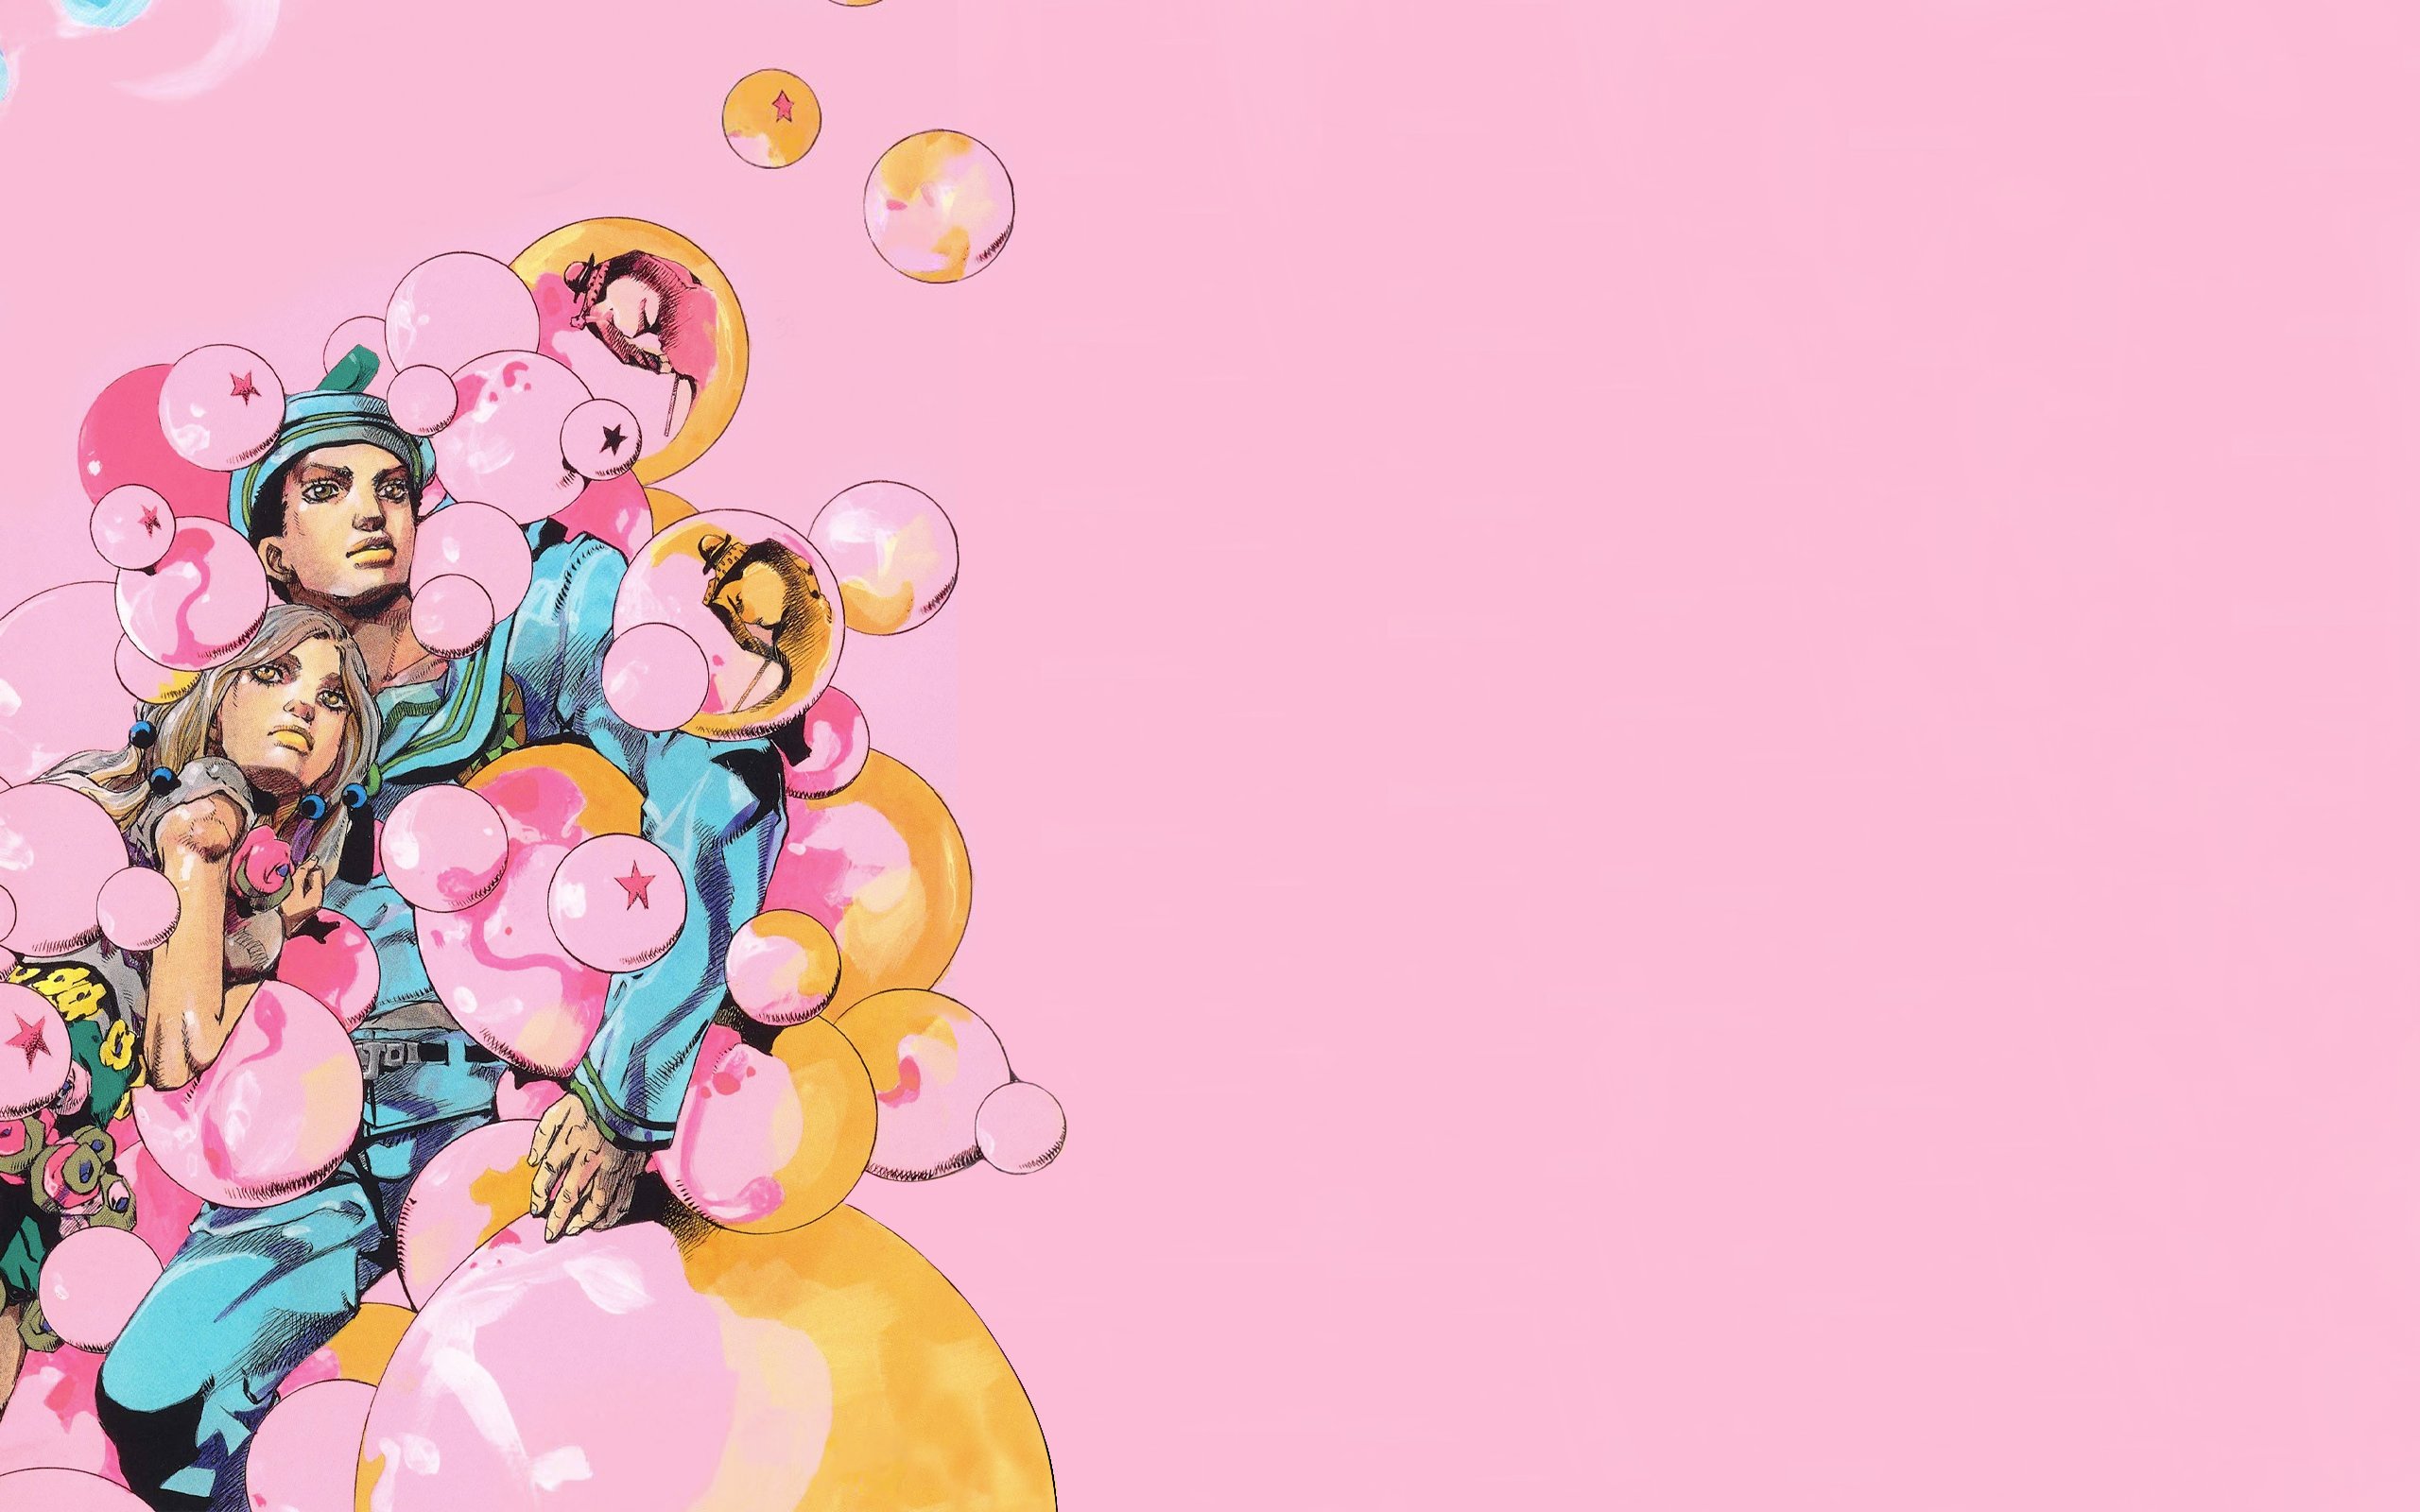 O Xrhsths Frostyalmighty Sto Twitter Jojolion Got A New Volume And Ultra Jump Cover So To Celebrate Here S Another Round Of Wallpaper Edits For Jjl Vol 25 And The Uj Cover For